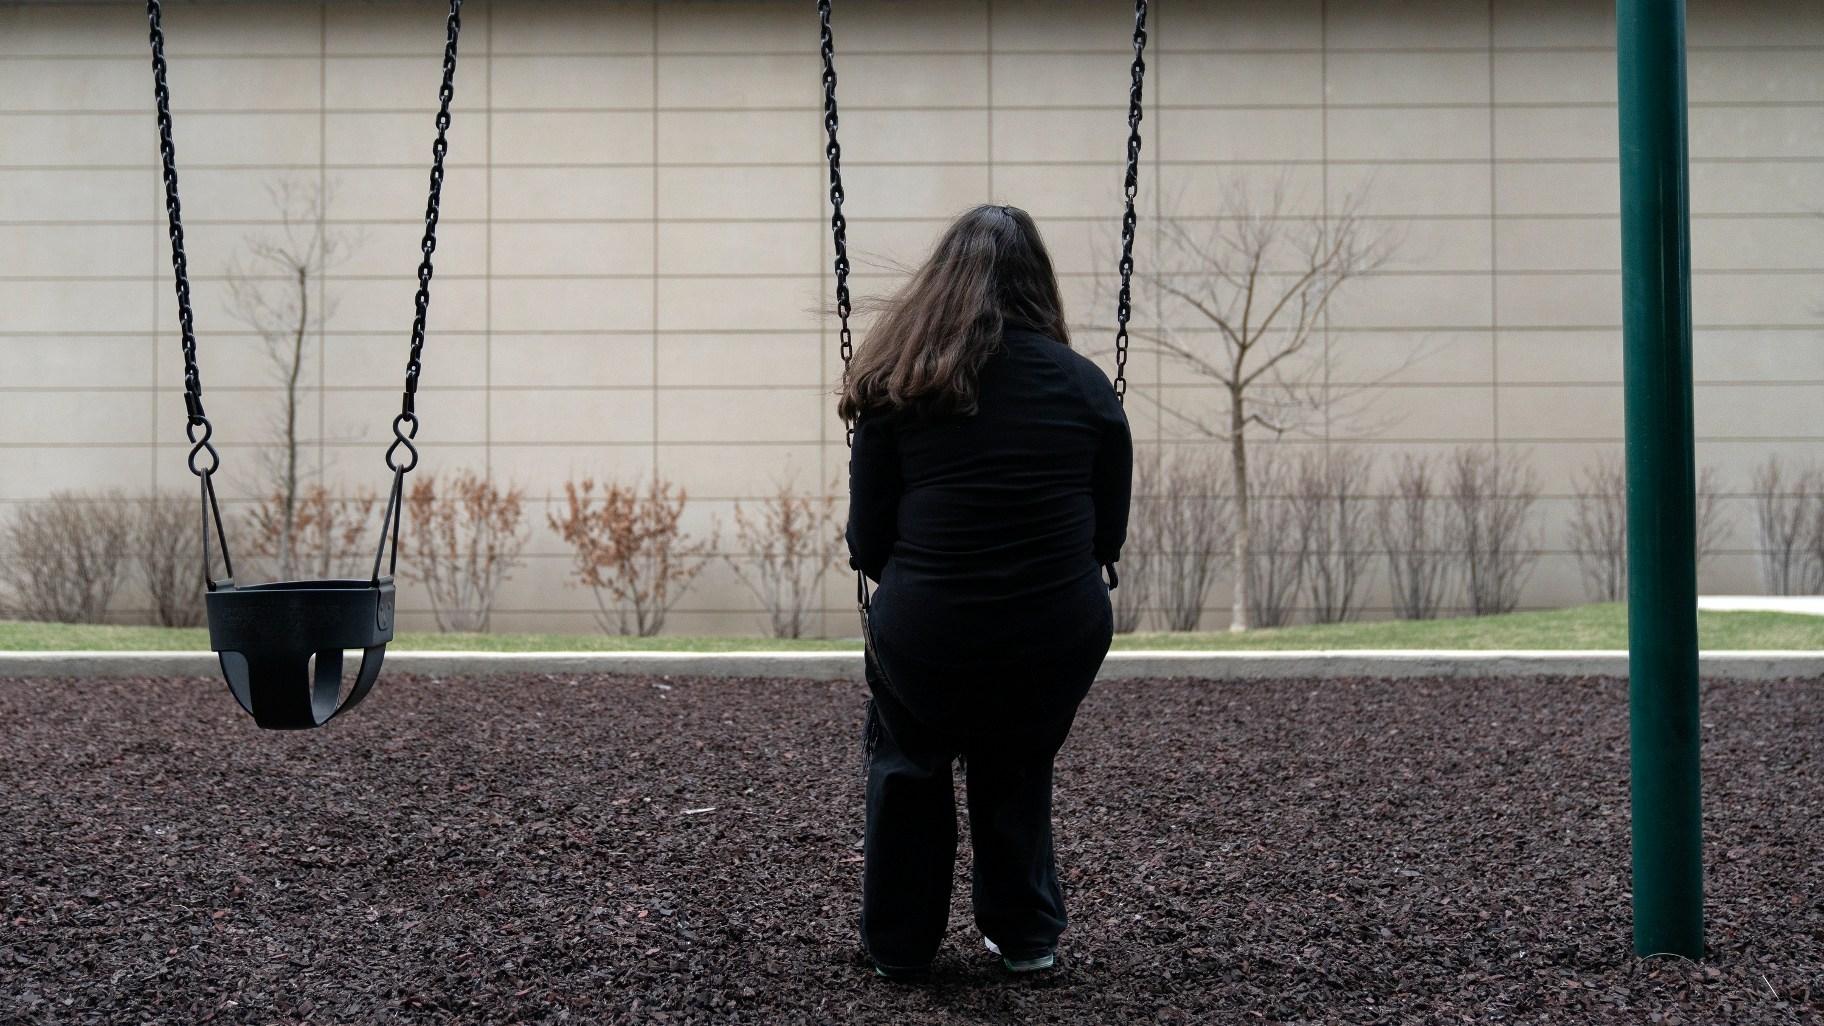 Amelia, 16, sits for a portrait in a park near her home in Illinois on Friday, March 24, 2023. “We are so strong and we go through so, so much," says the teenage girl who loves to sing and wants to be a surgeon. Amelia has also faced bullying, toxic friendships, and menacing threats from a boy at school who said she “deserved to be raped.” (AP Photo Erin Hooley)